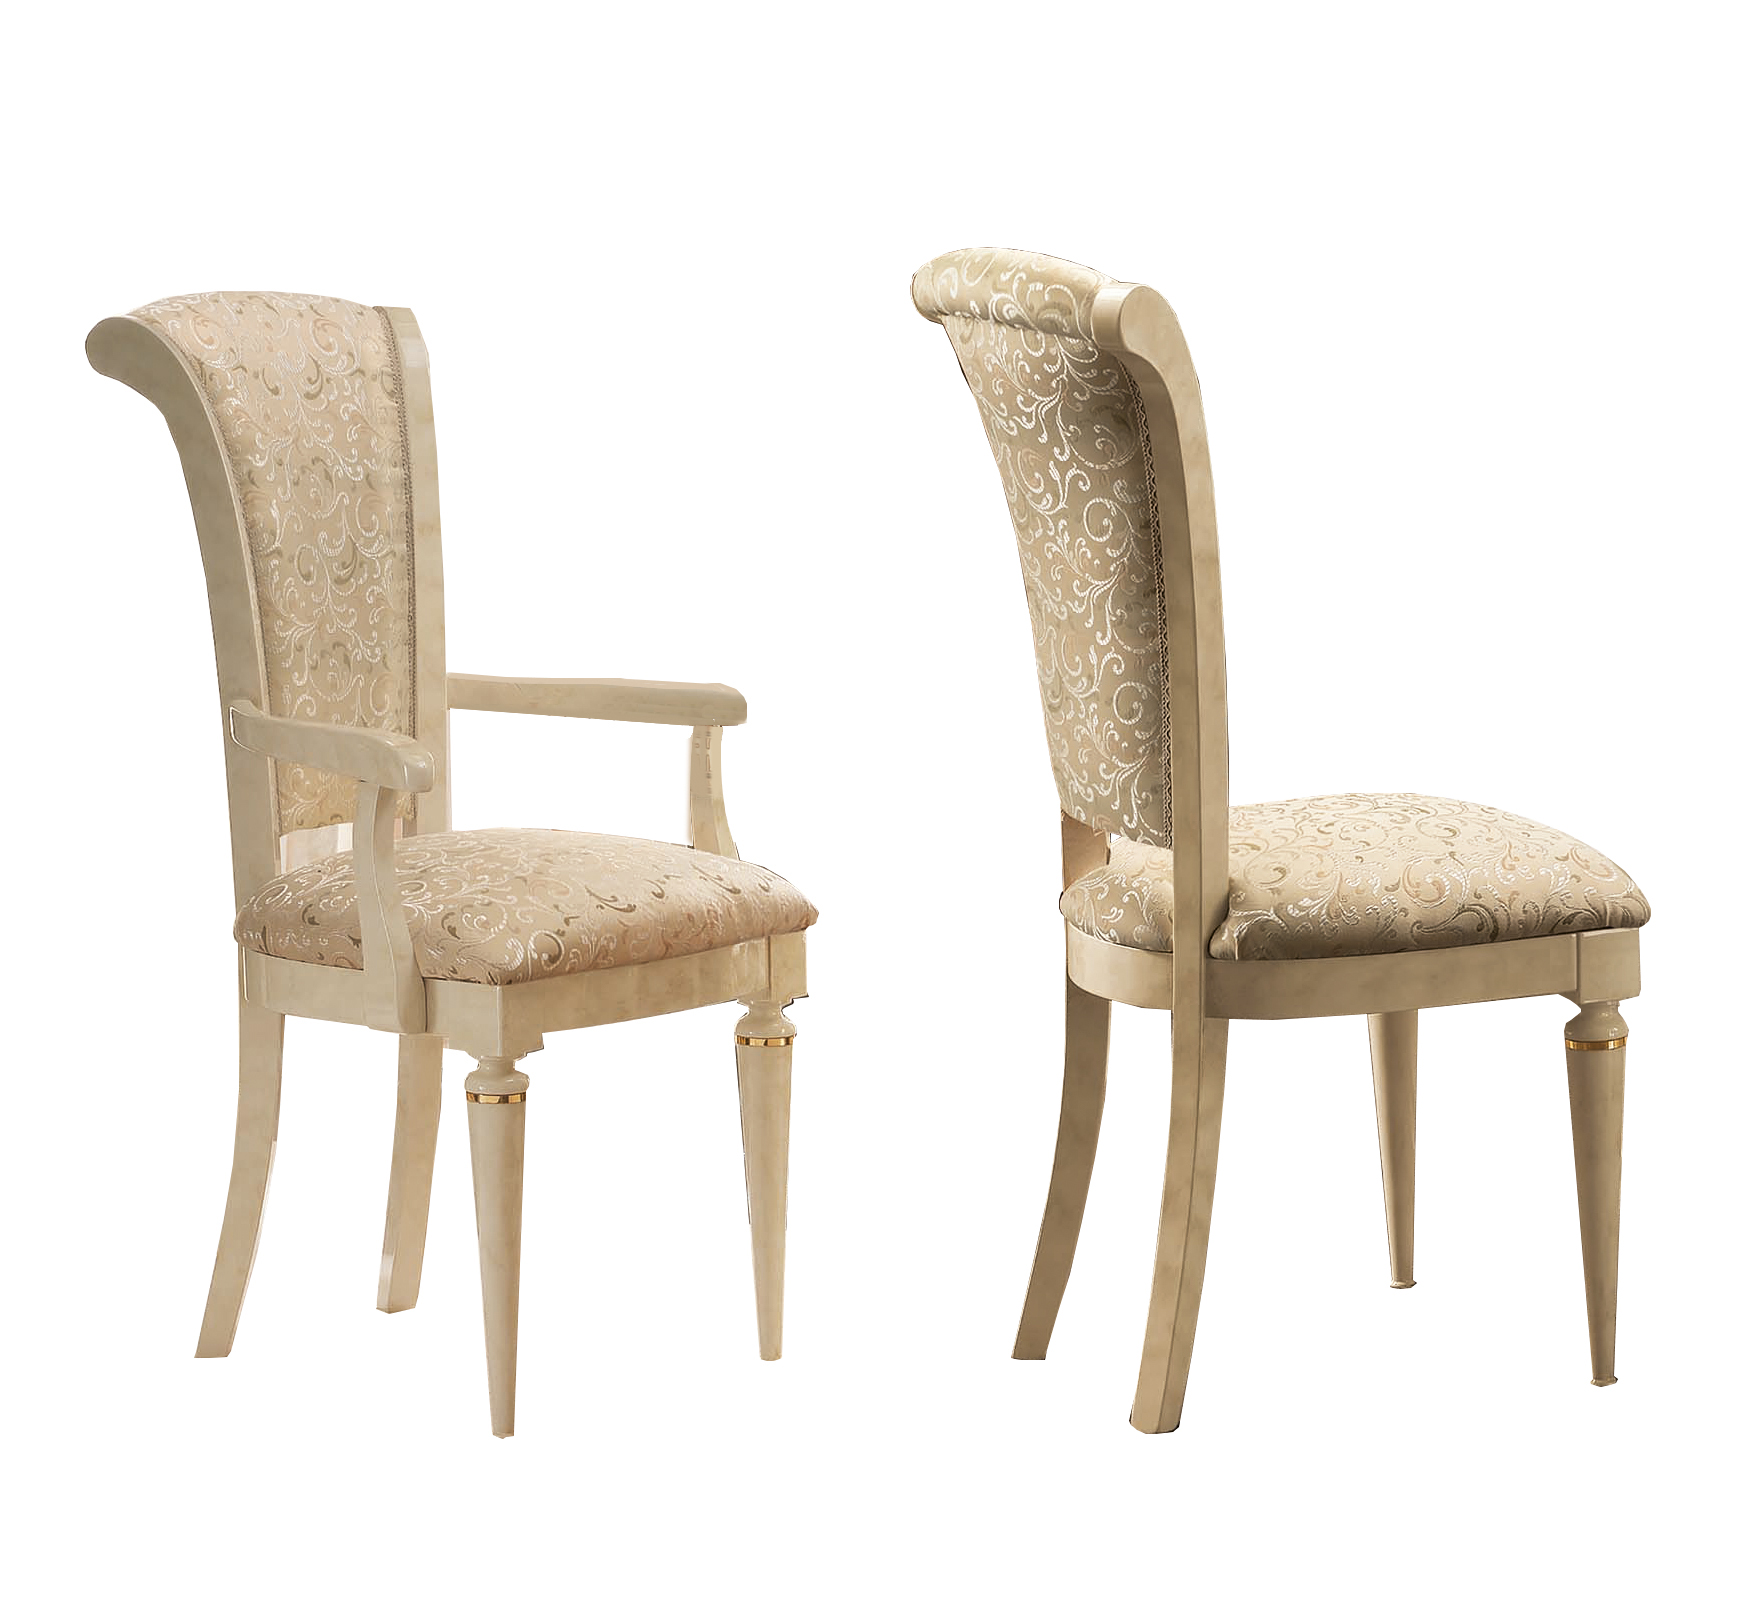 Dining Room Furniture Chairs Fantasia Chair by Arredoclassic